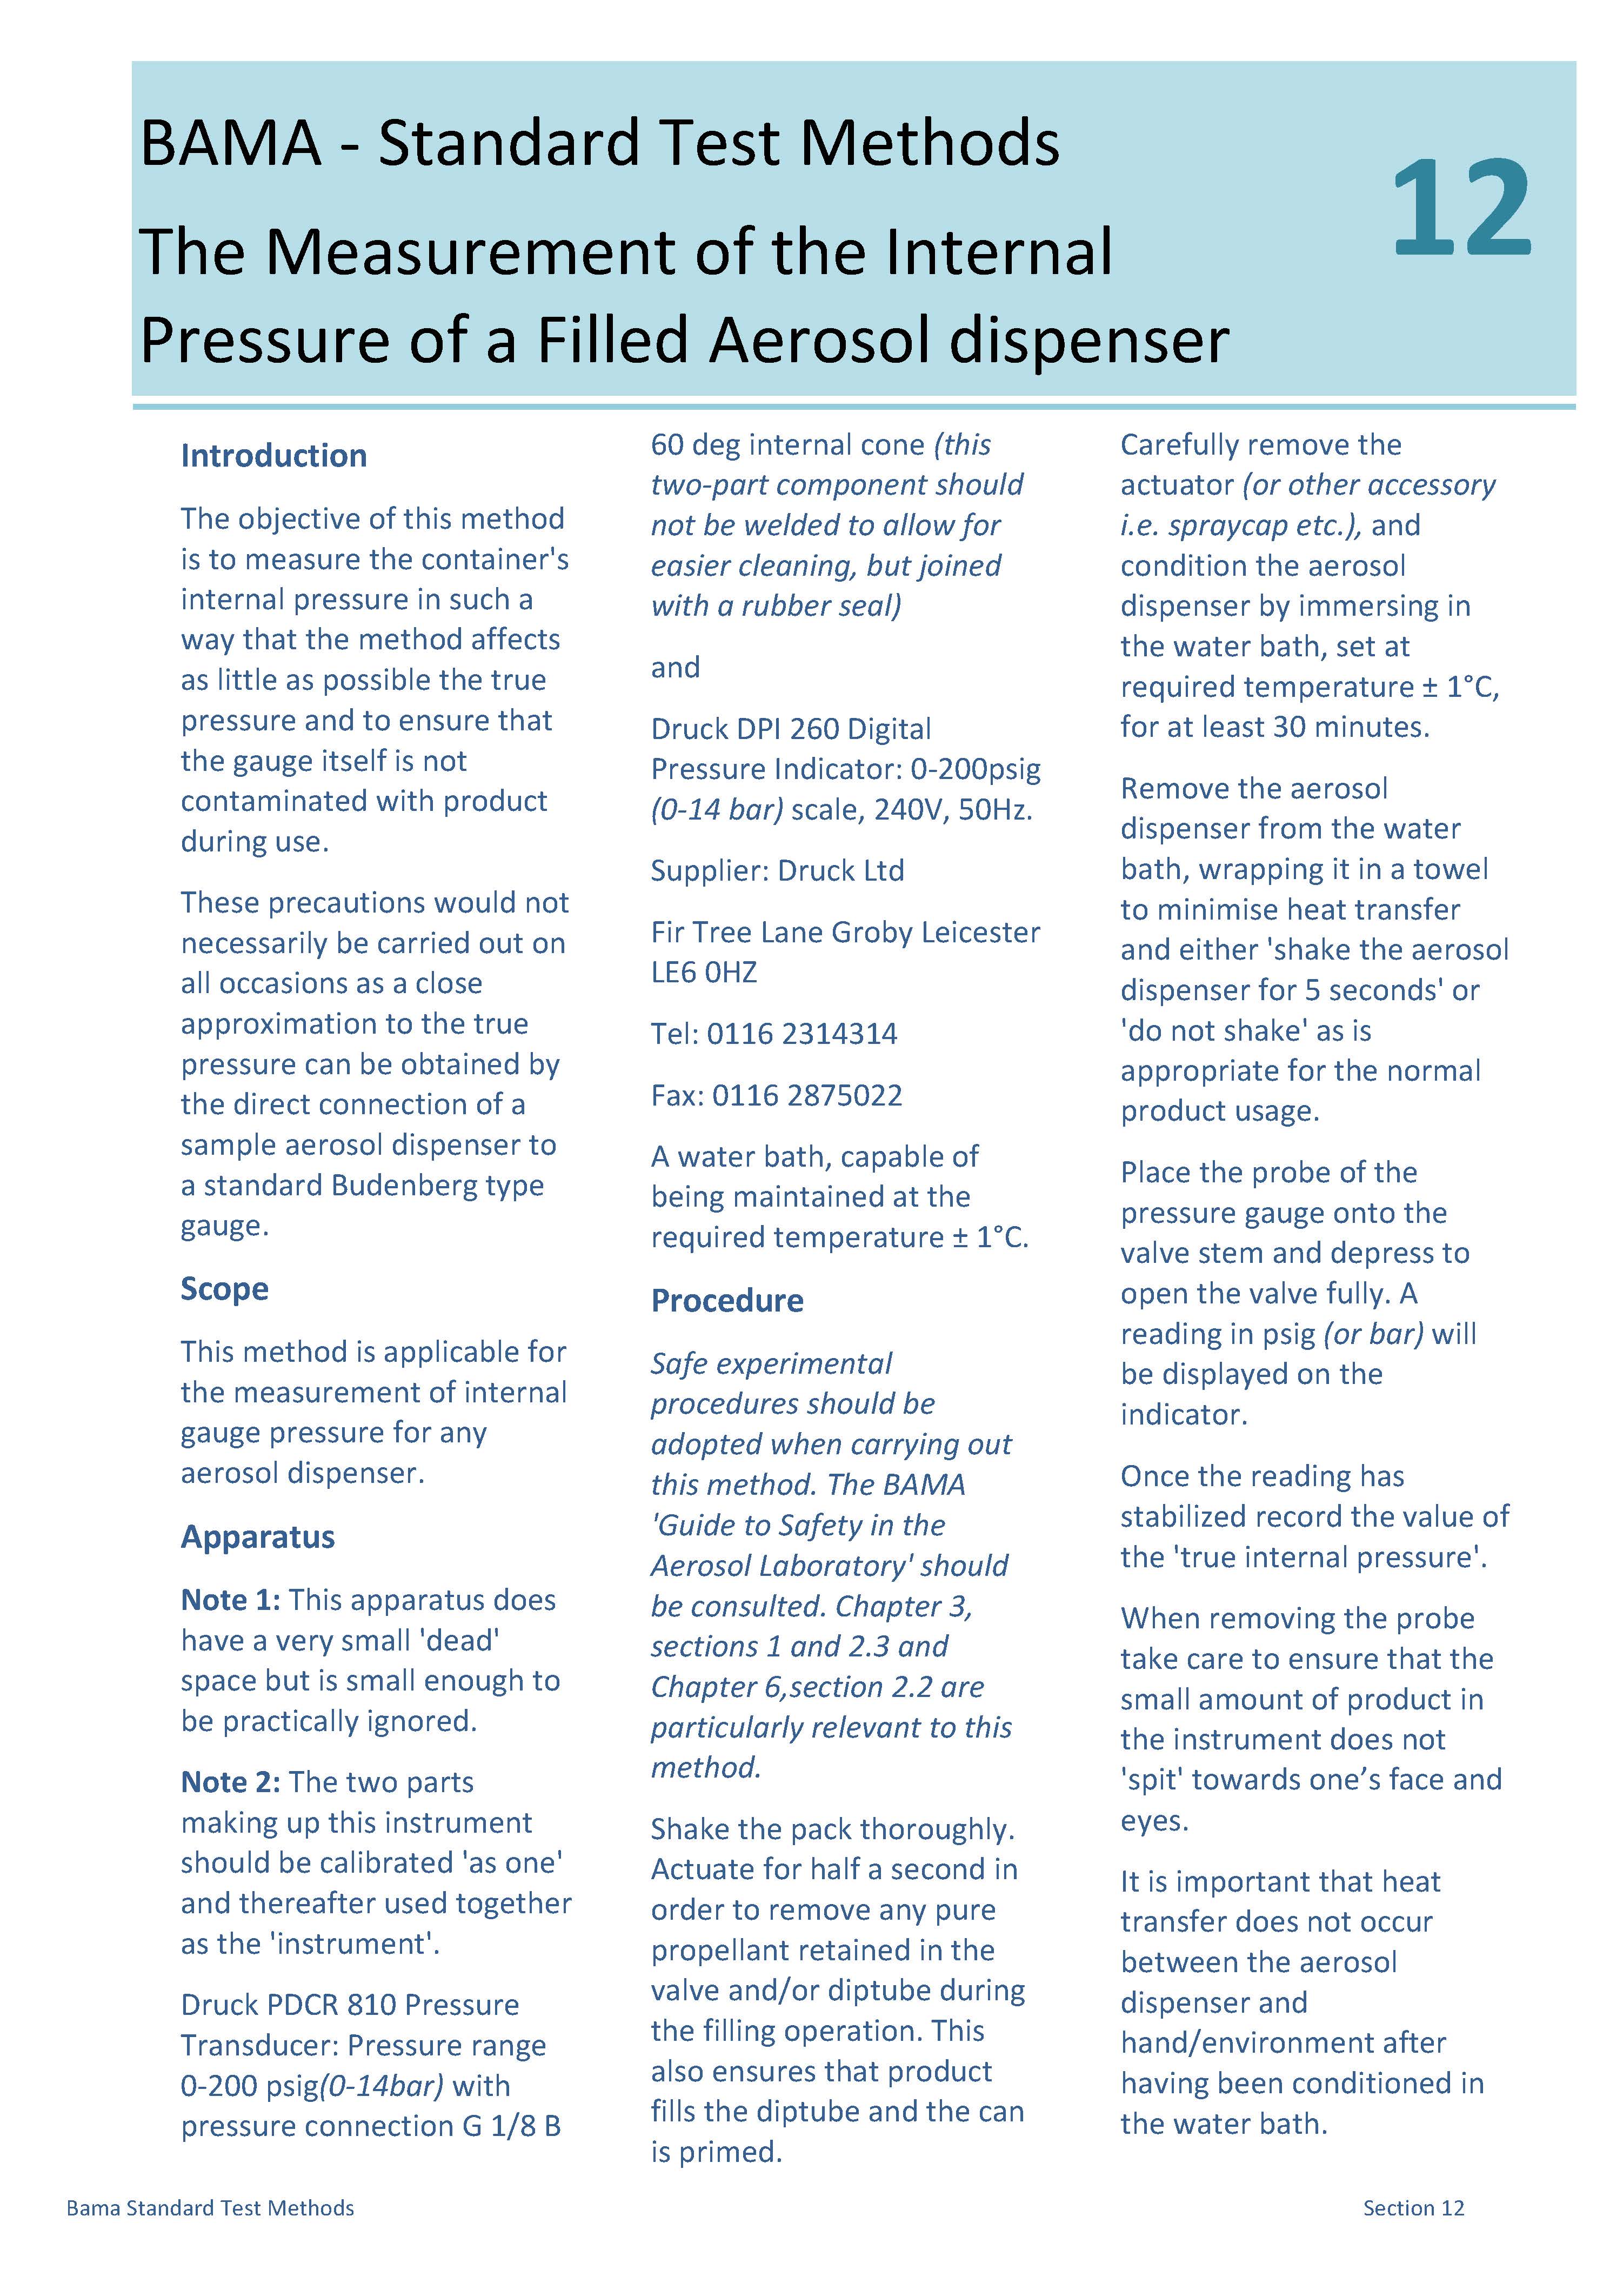 12 - The Measurement of the Internal Pressure of a Filled Aerosol